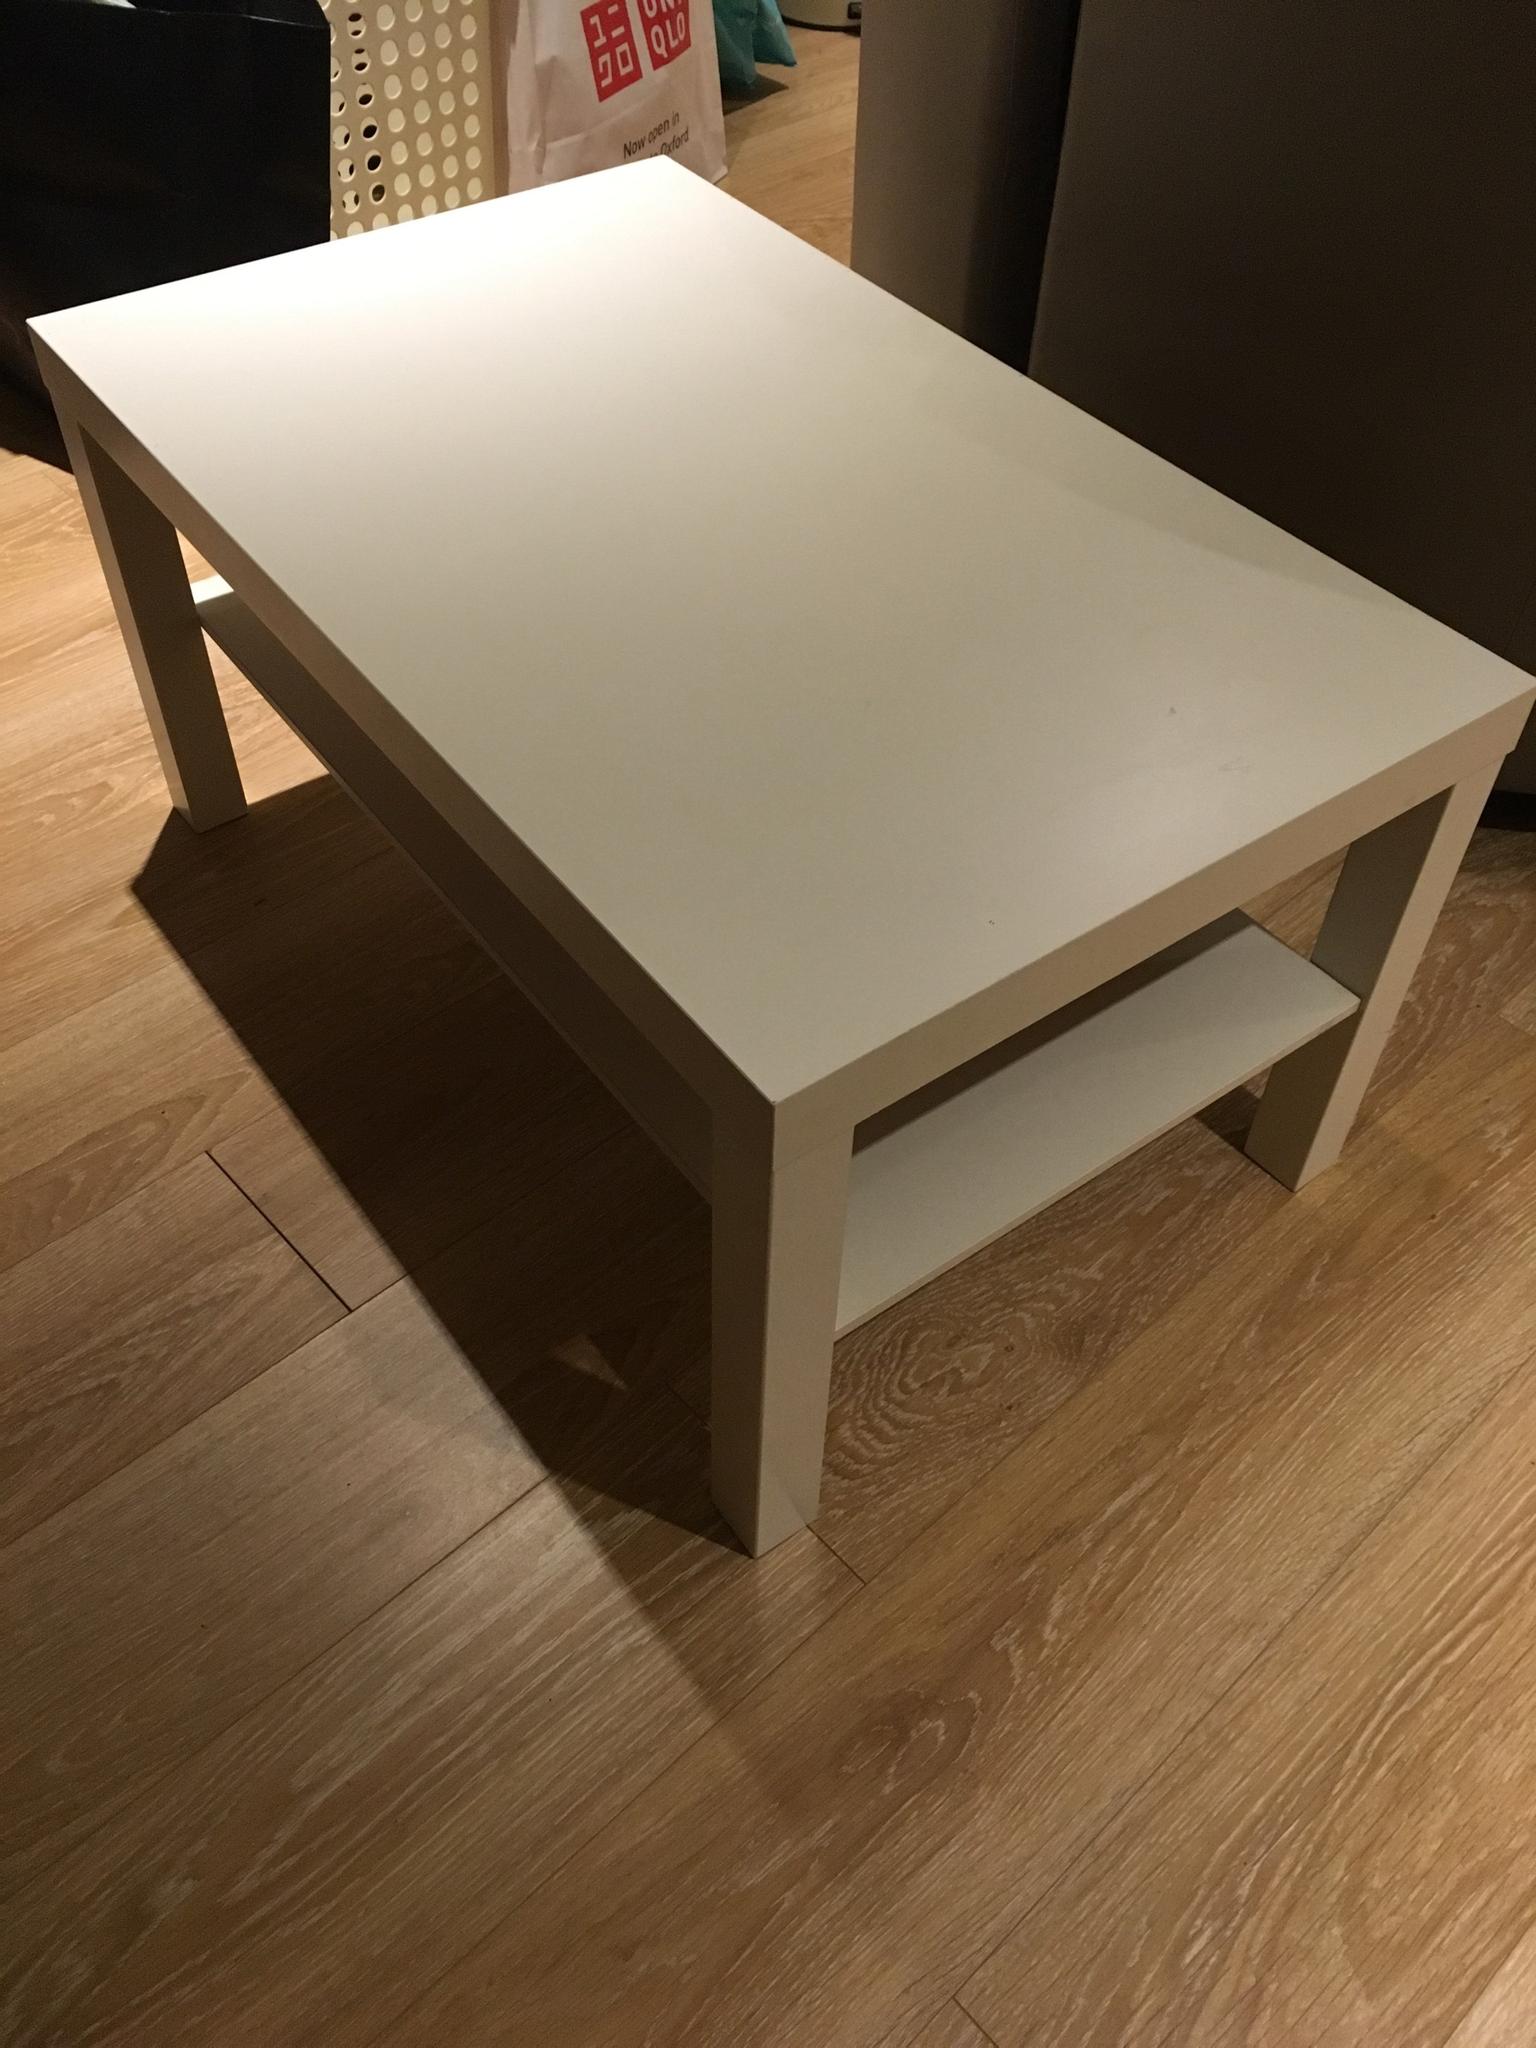 Ikea Lack Coffee Table White In Ox2 Oxford For Free For Sale Shpock